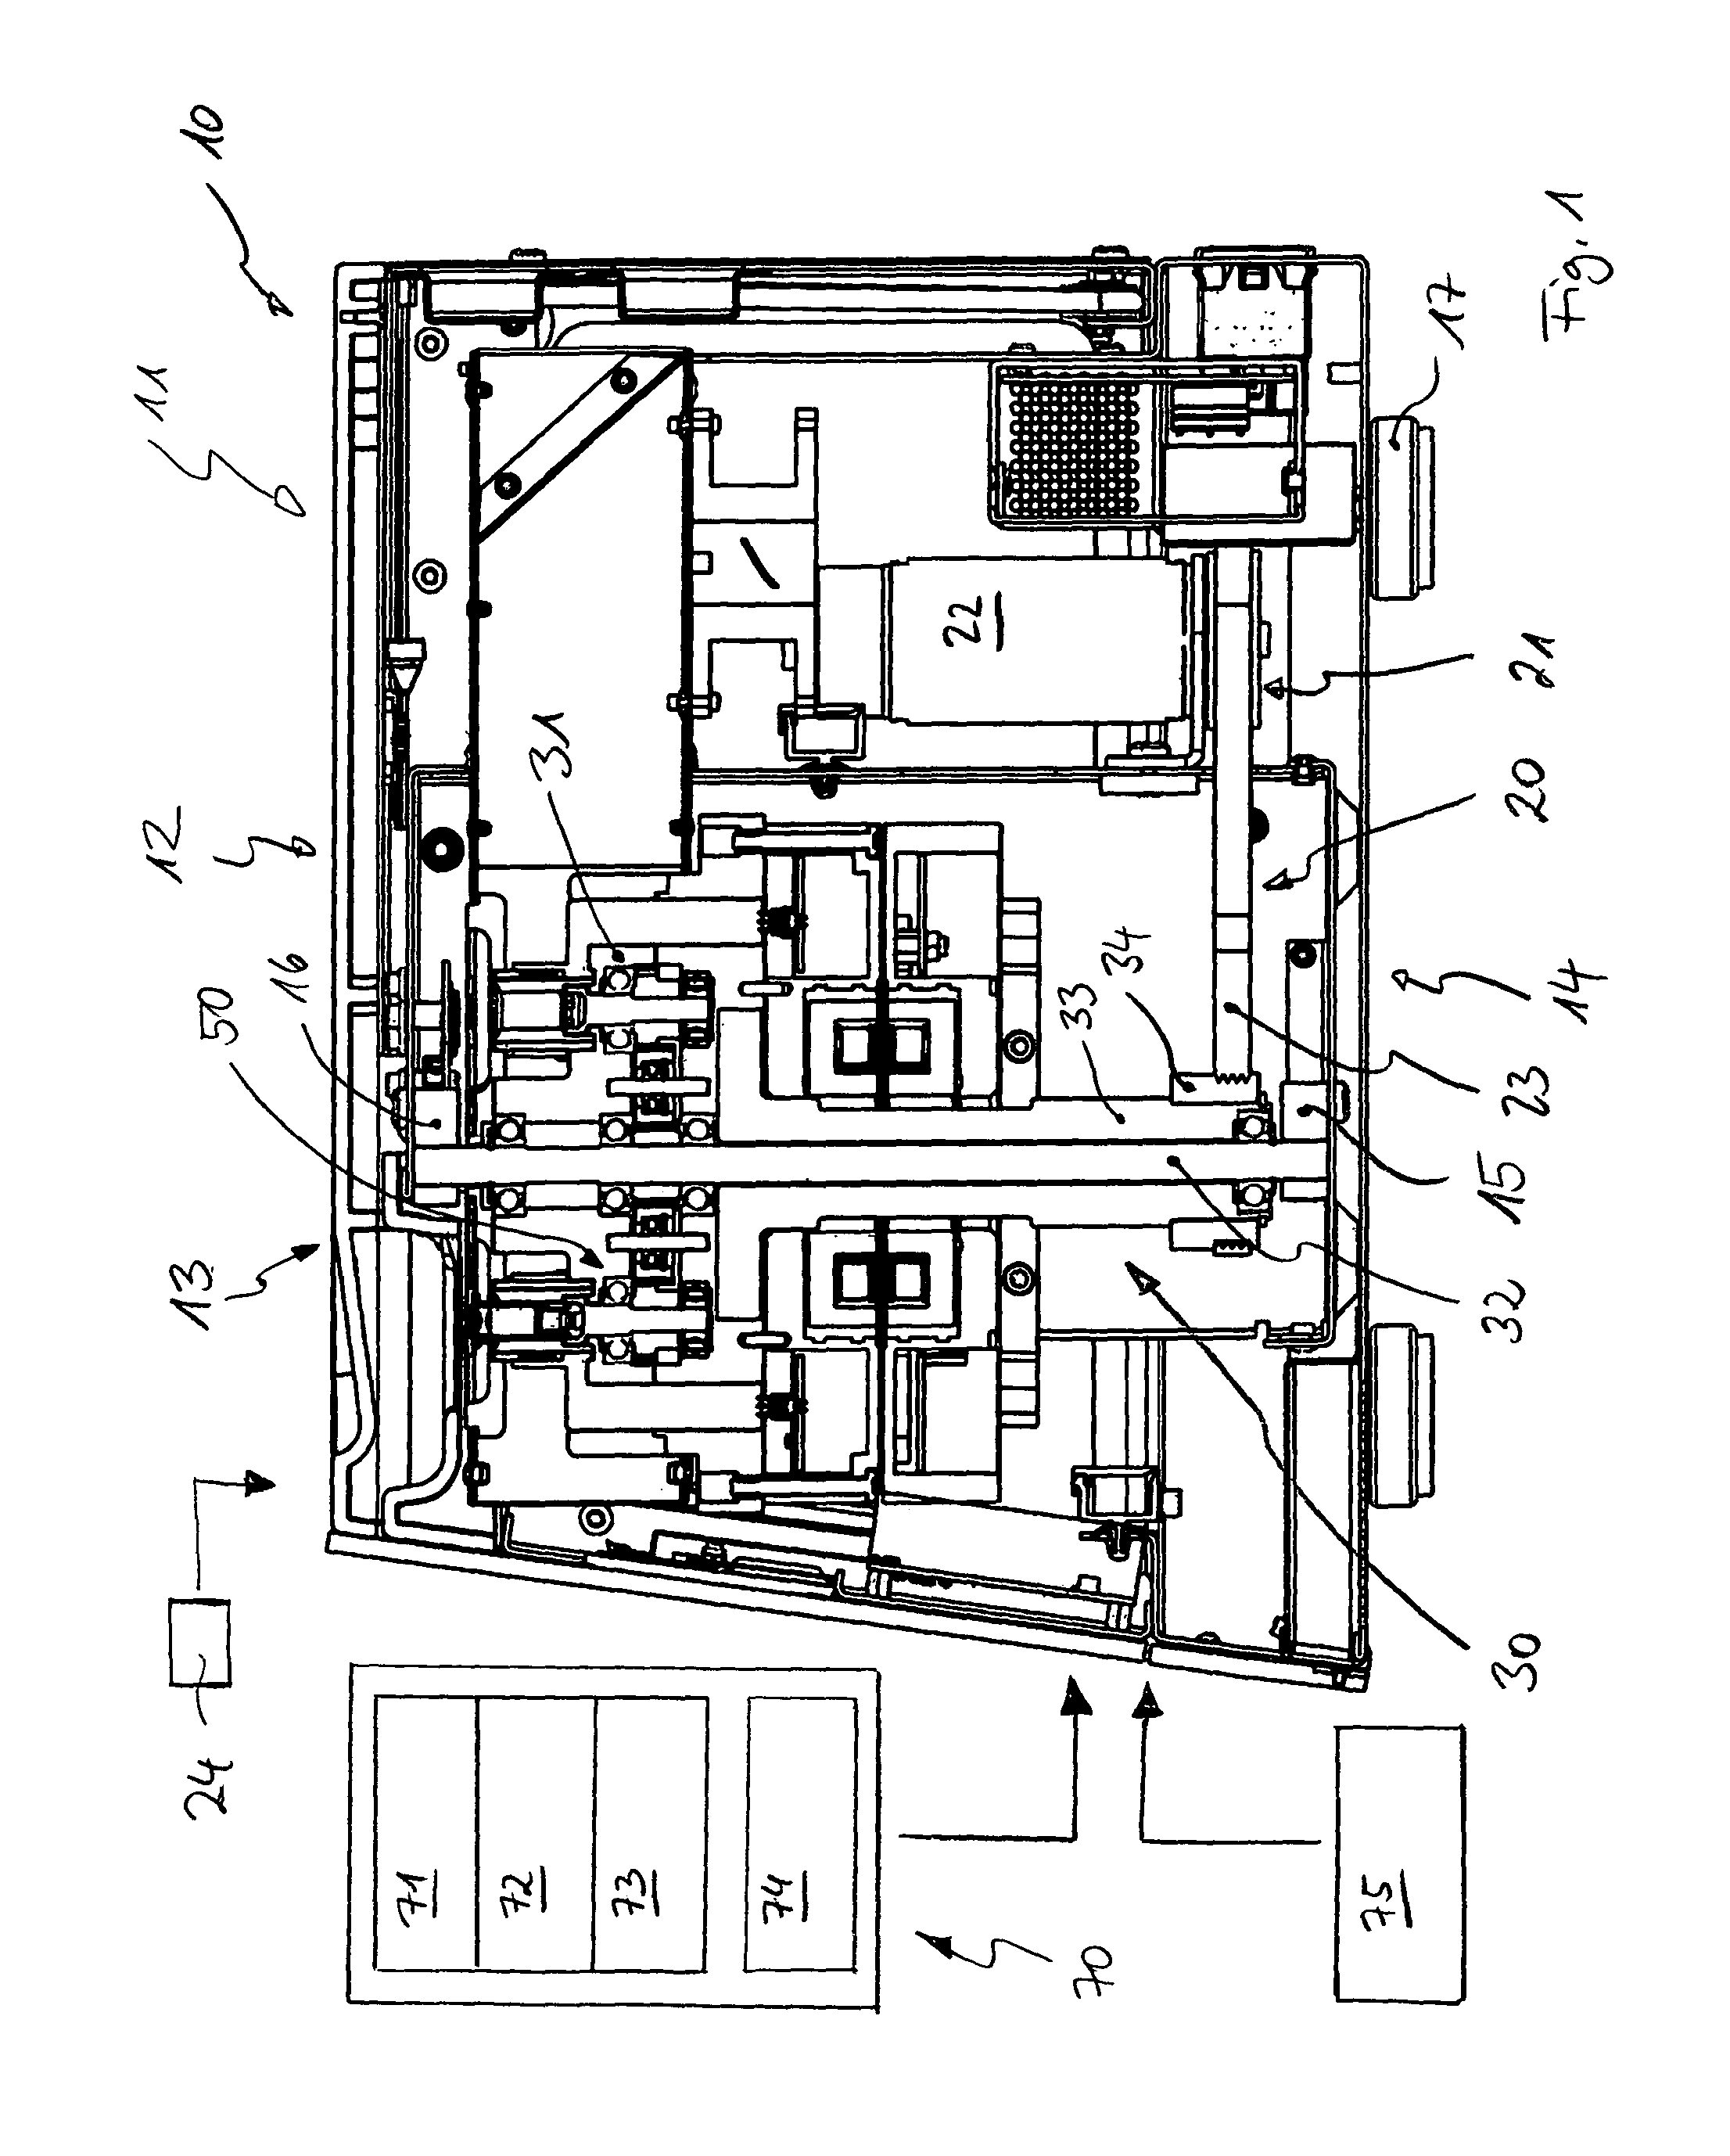 Apparatus and method for a lysis of a sample, in particular for an automated and/or controlled lysis of a sample